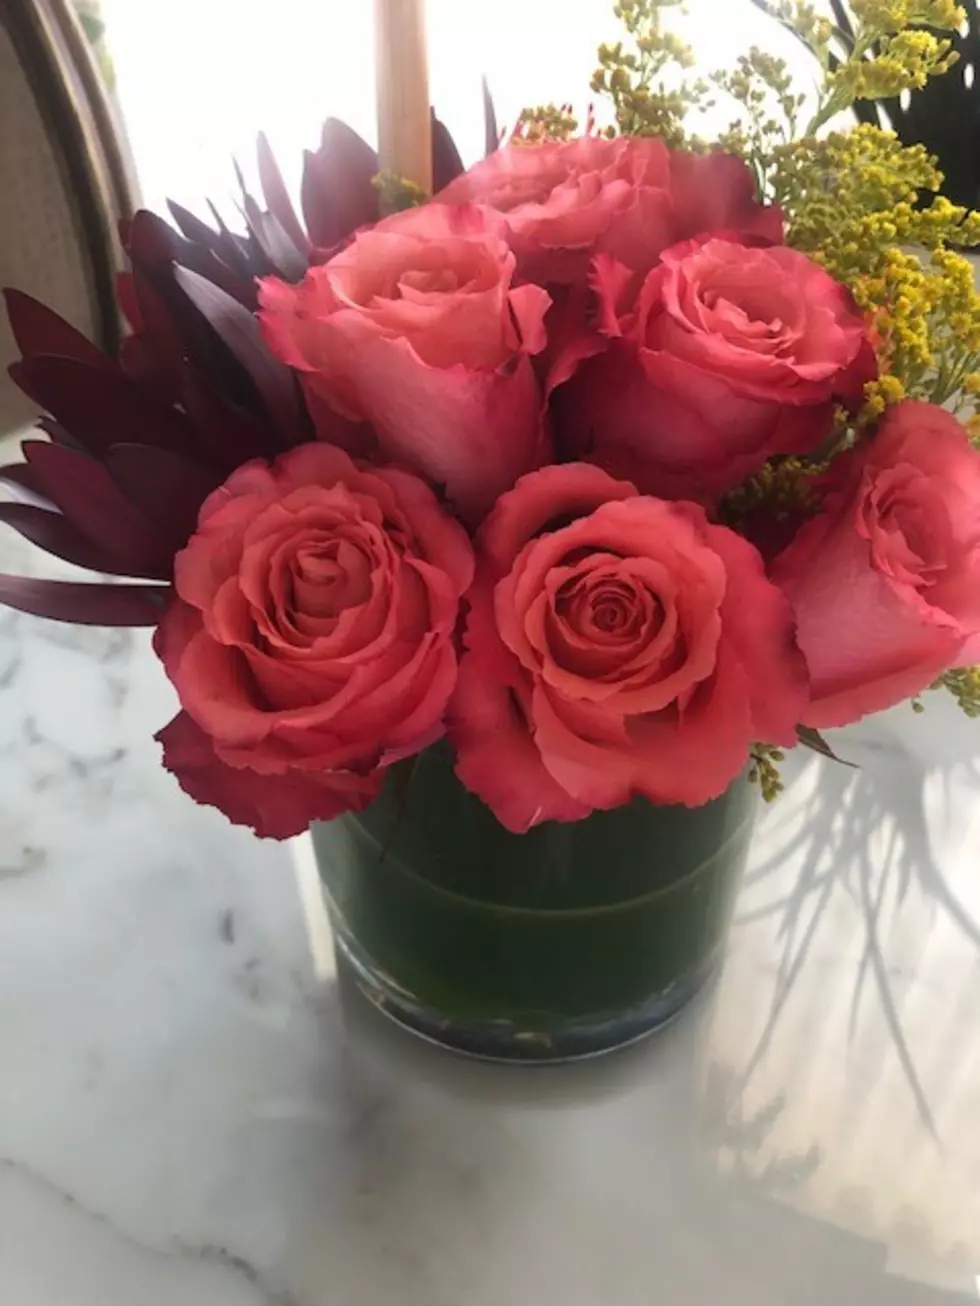 You Should Always Have Fresh Flowers In Your Home